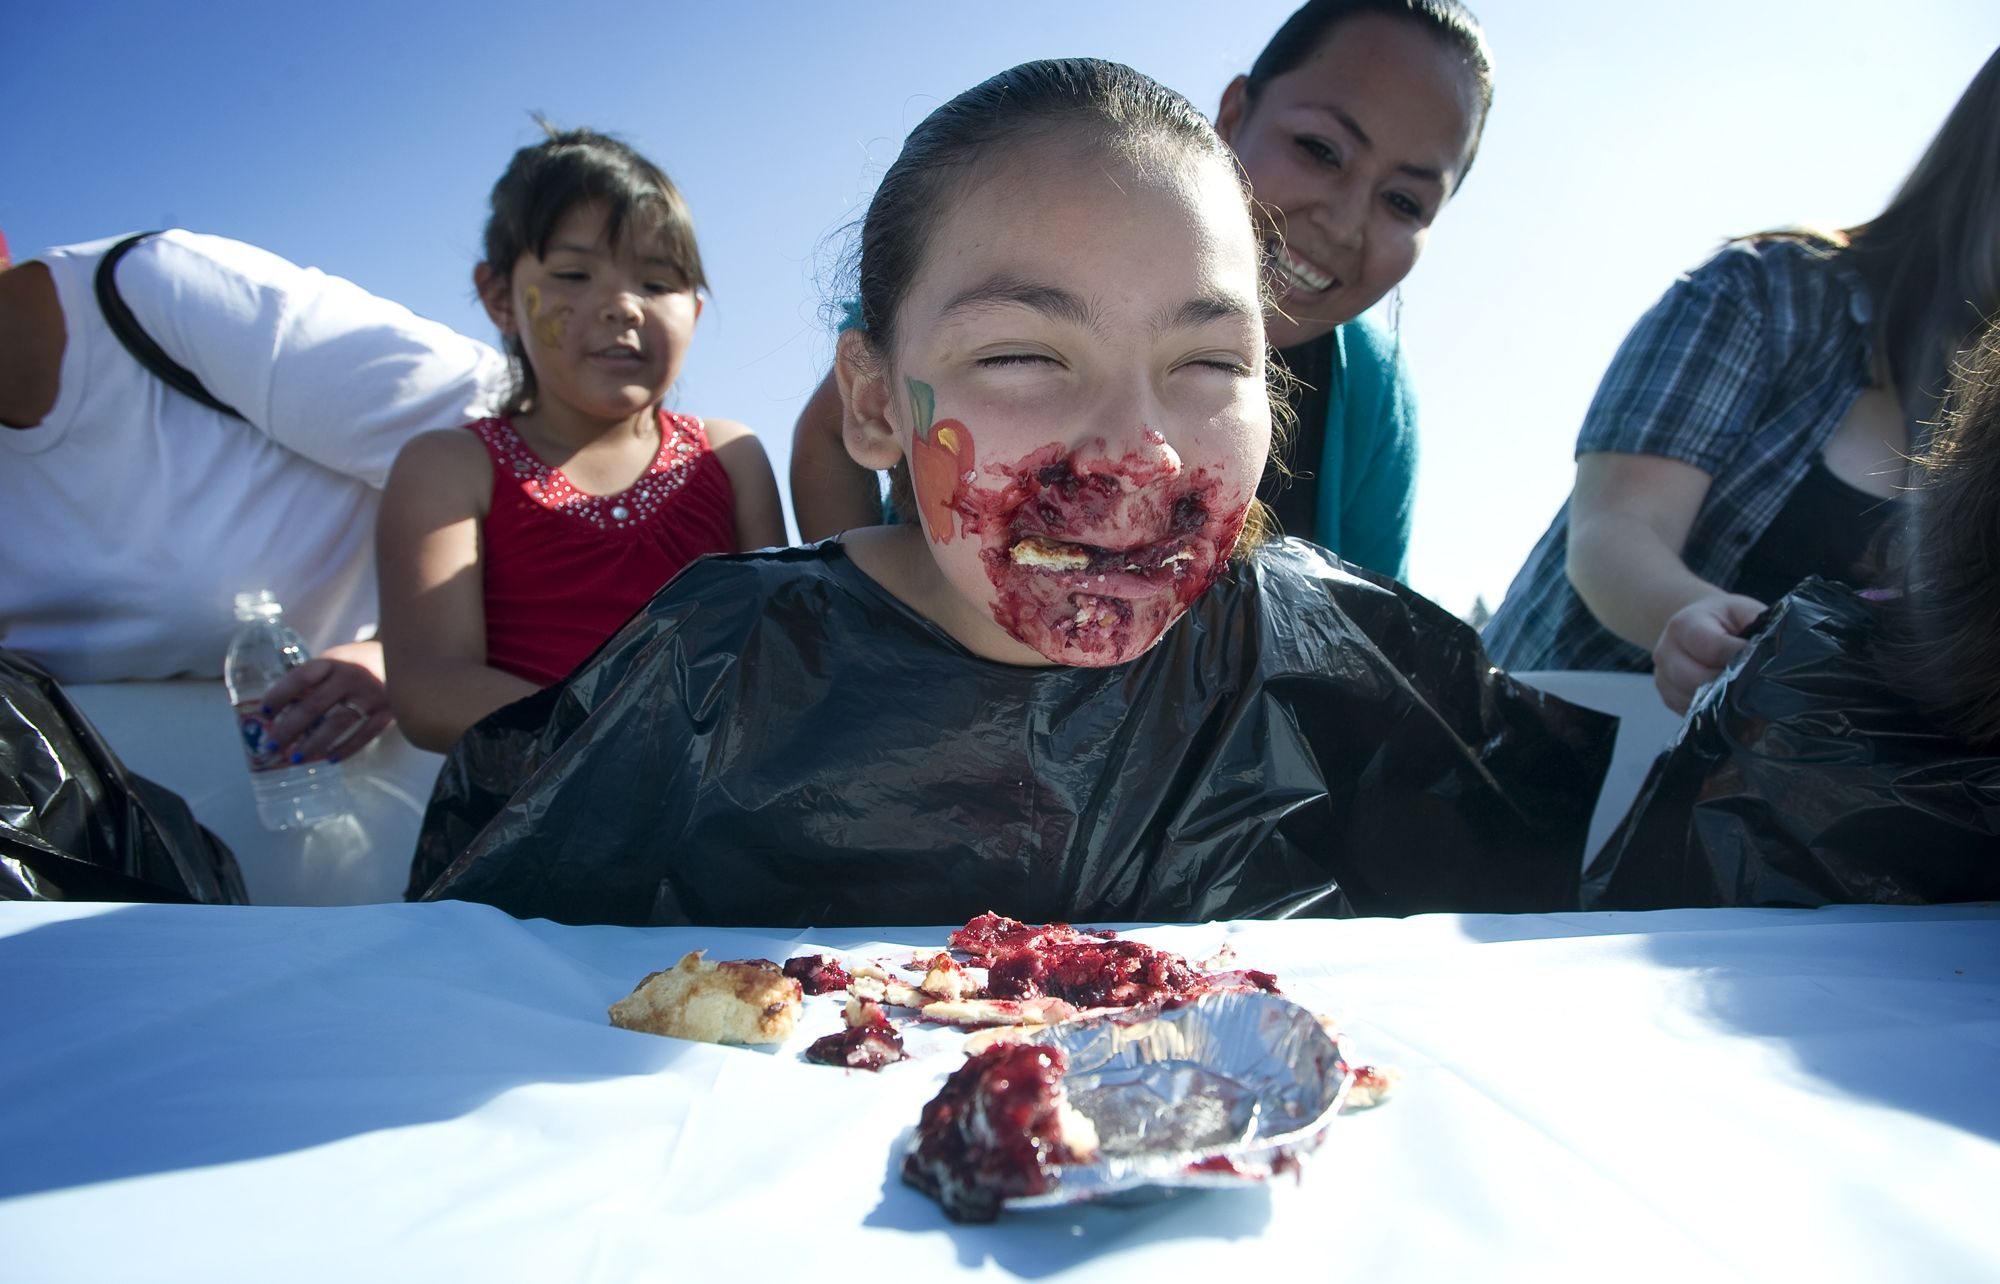 Jayleene Arellano, 10, of Vancouver, competes in a pie-eating contest Saturday at the Harvest Fun Day at Heritage Farm in Hazel Dell. Her mother, Olivia Arellano, and sister Aaliyah, 8, cheer her on.